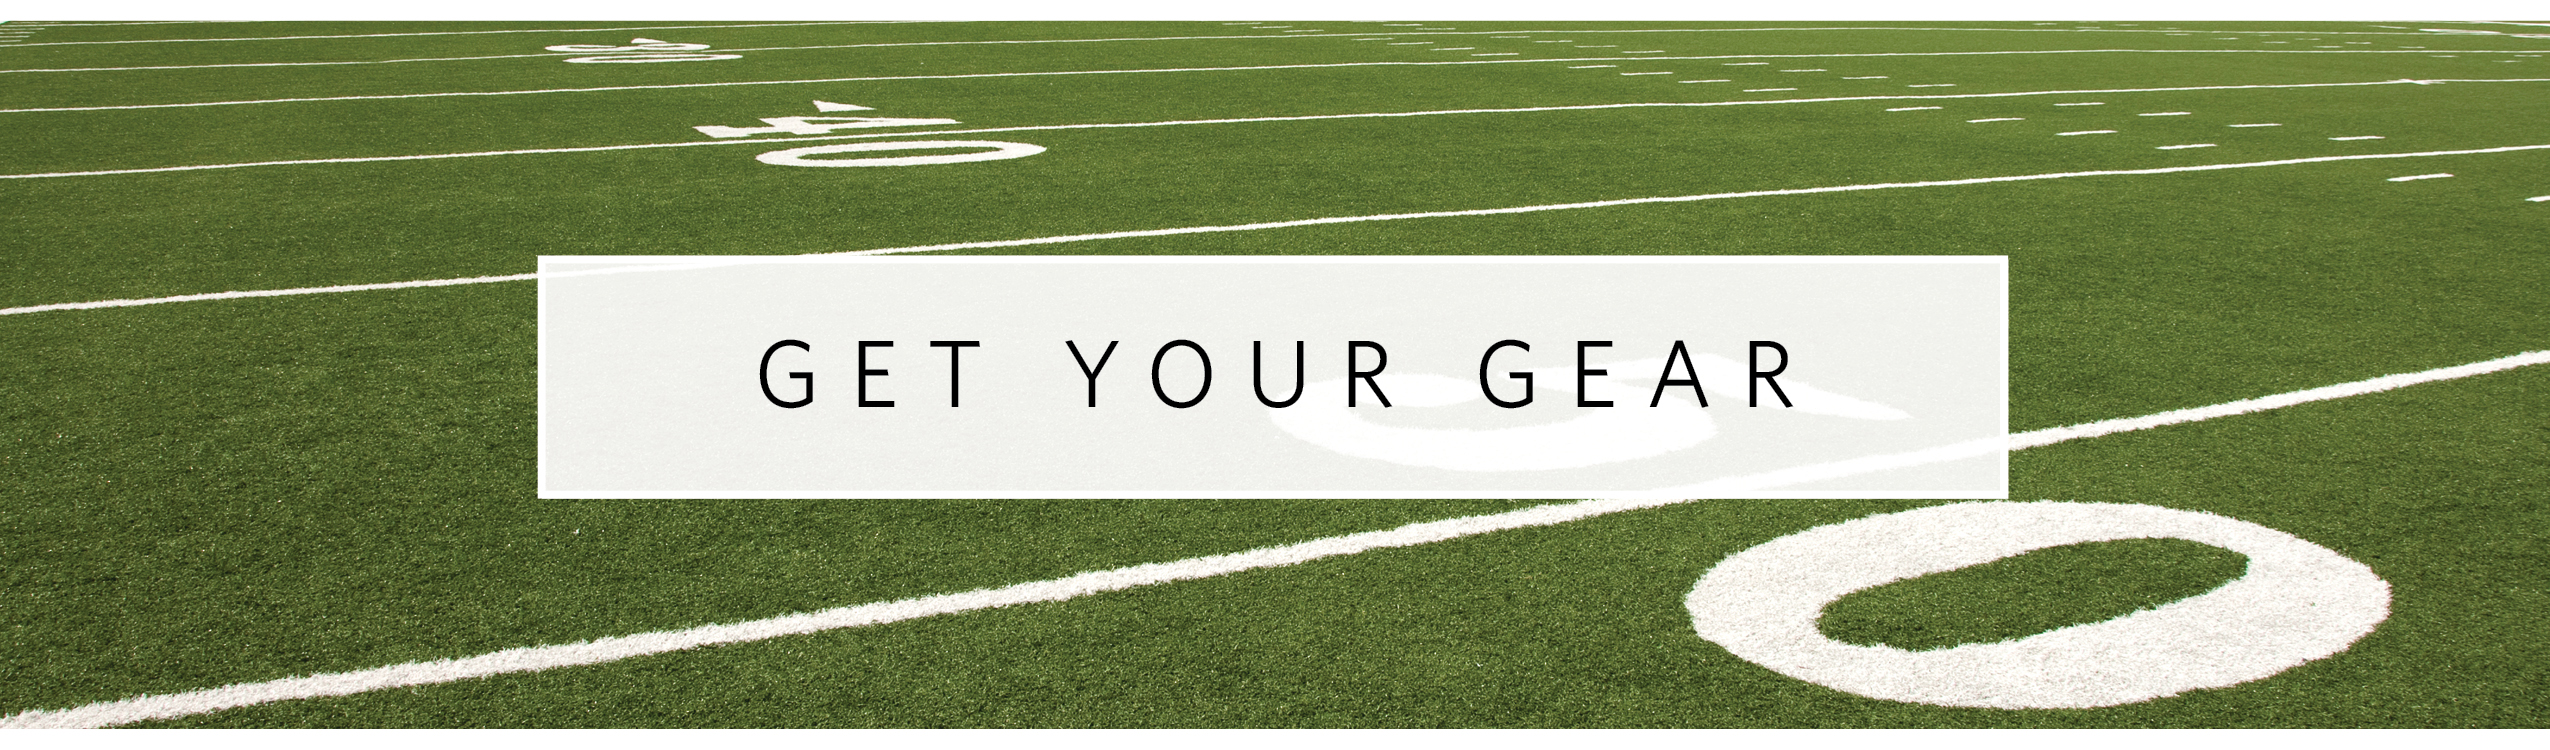 Football field with text, 